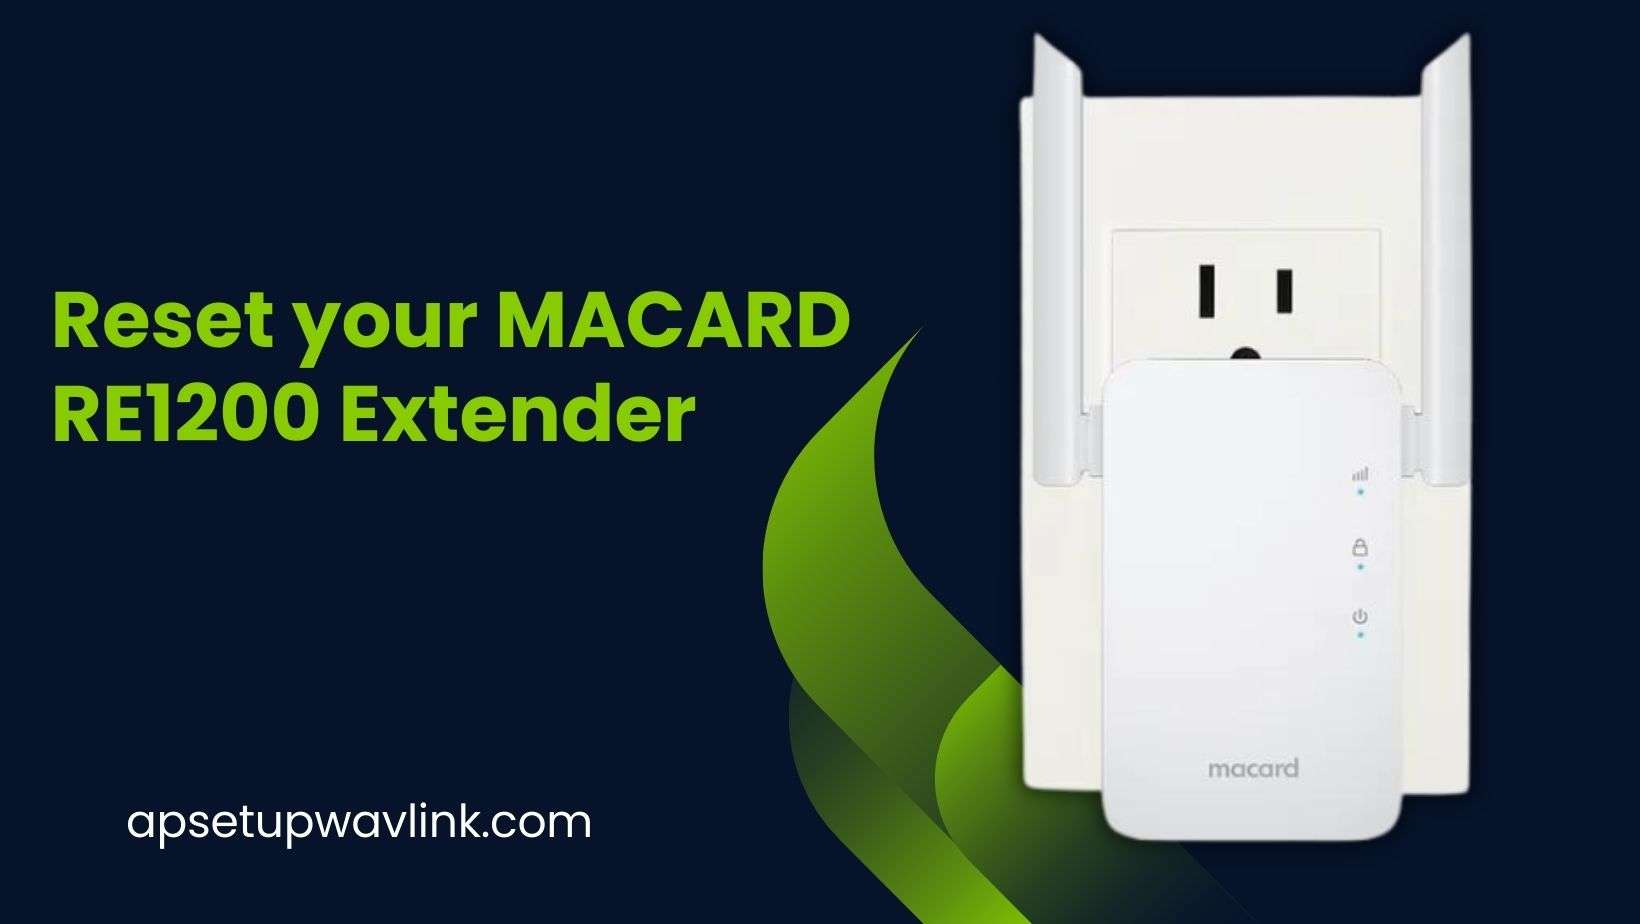 You are currently viewing How to Reset your MACARD RE1200 Extender?